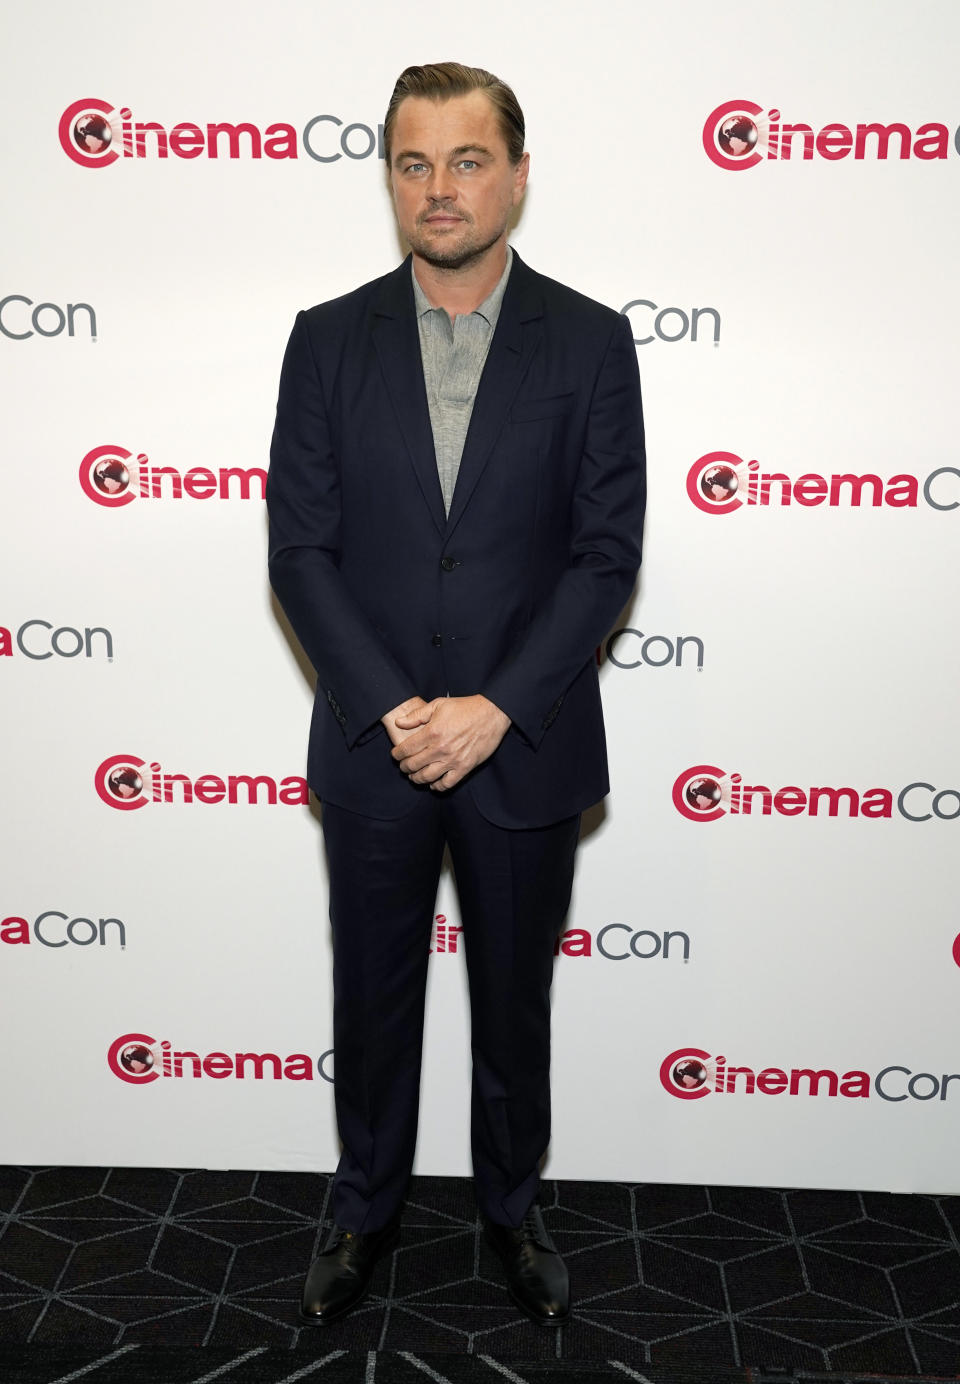 Actor Leonardo DiCaprio poses before the Martin Scorsese "Legend of Cinema" Award Presentation at CinemaCon 2023, the official convention of the National Association of Theatre Owners (NATO) at Caesars Palace, Thursday, April 27, 2023, in Las Vegas. (AP Photo/Chris Pizzello)